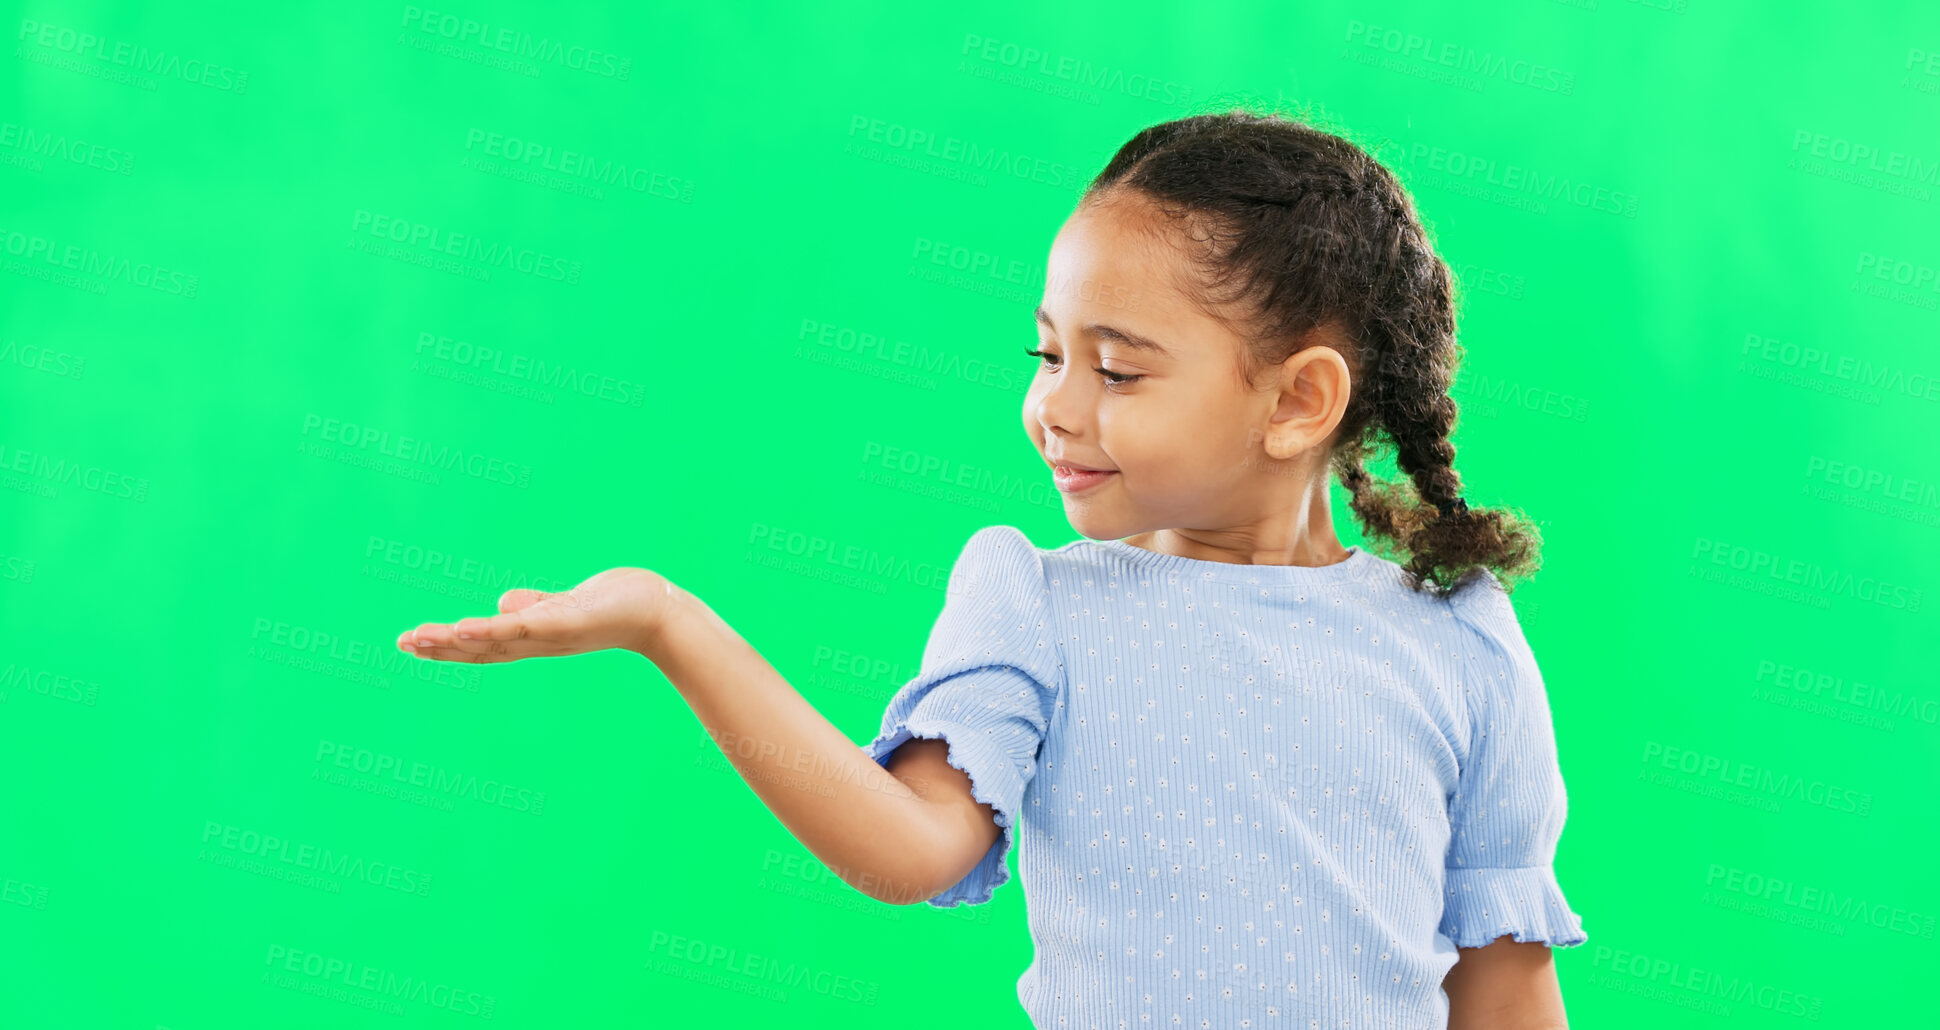 Buy stock photo Green screen, hand gesture and child face of a young girl with mock up showing advertisement or product. Portrait, smile and happiness of a little kid with isolated studio background with mockup